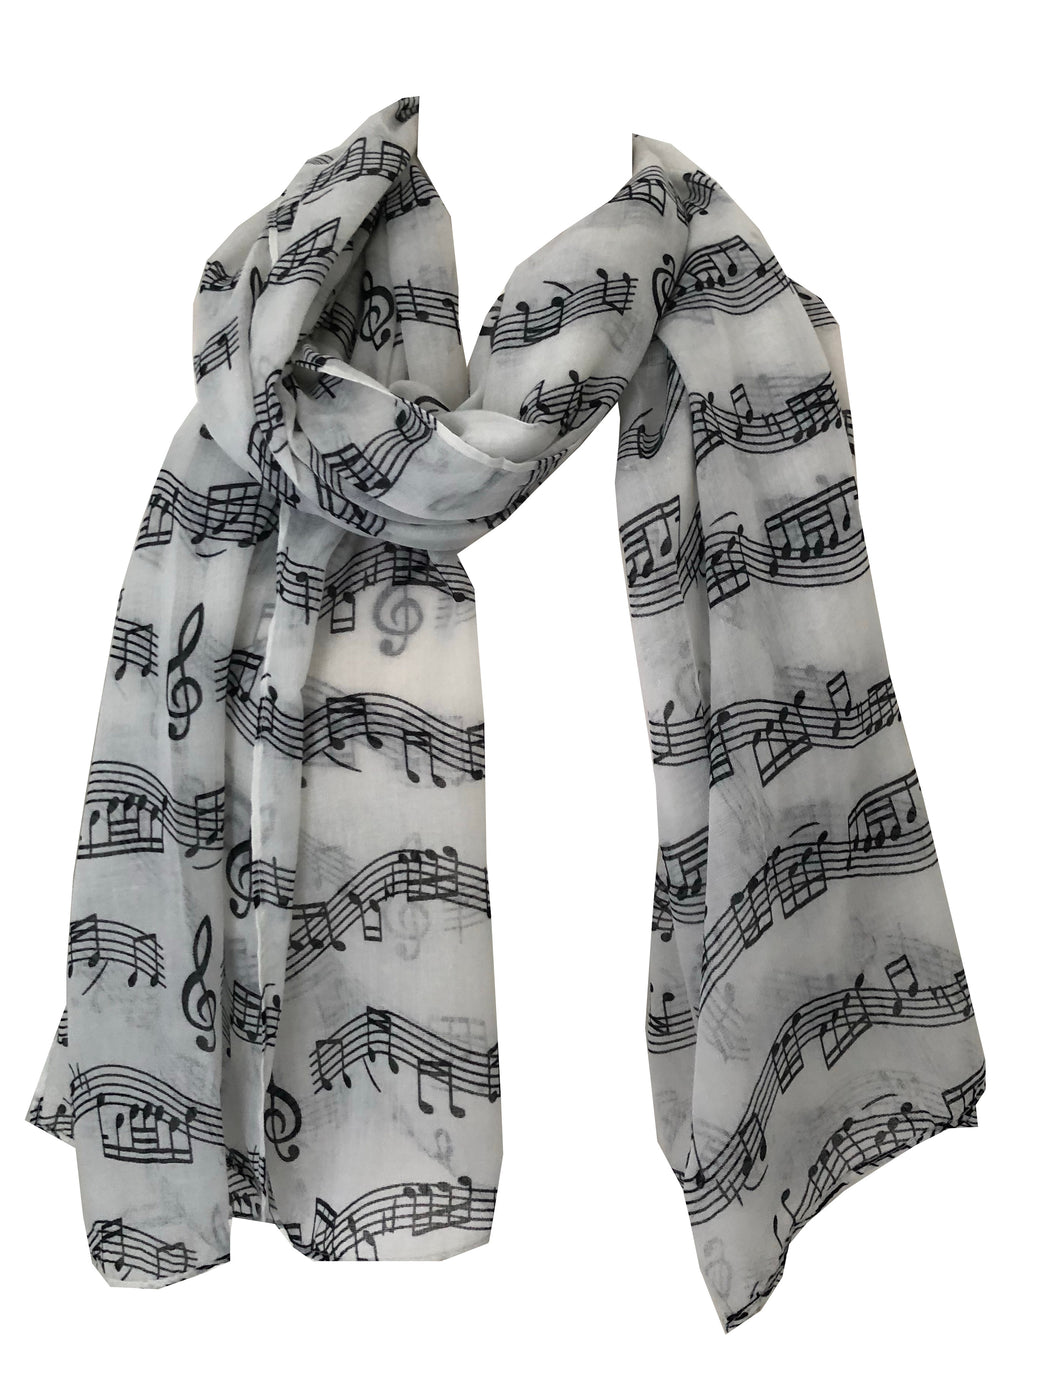 Pamper Yourself Now Big Scarf with White with Black Notes Print Scarf. Lovely Warm Winter Scarf Fantastic Gift